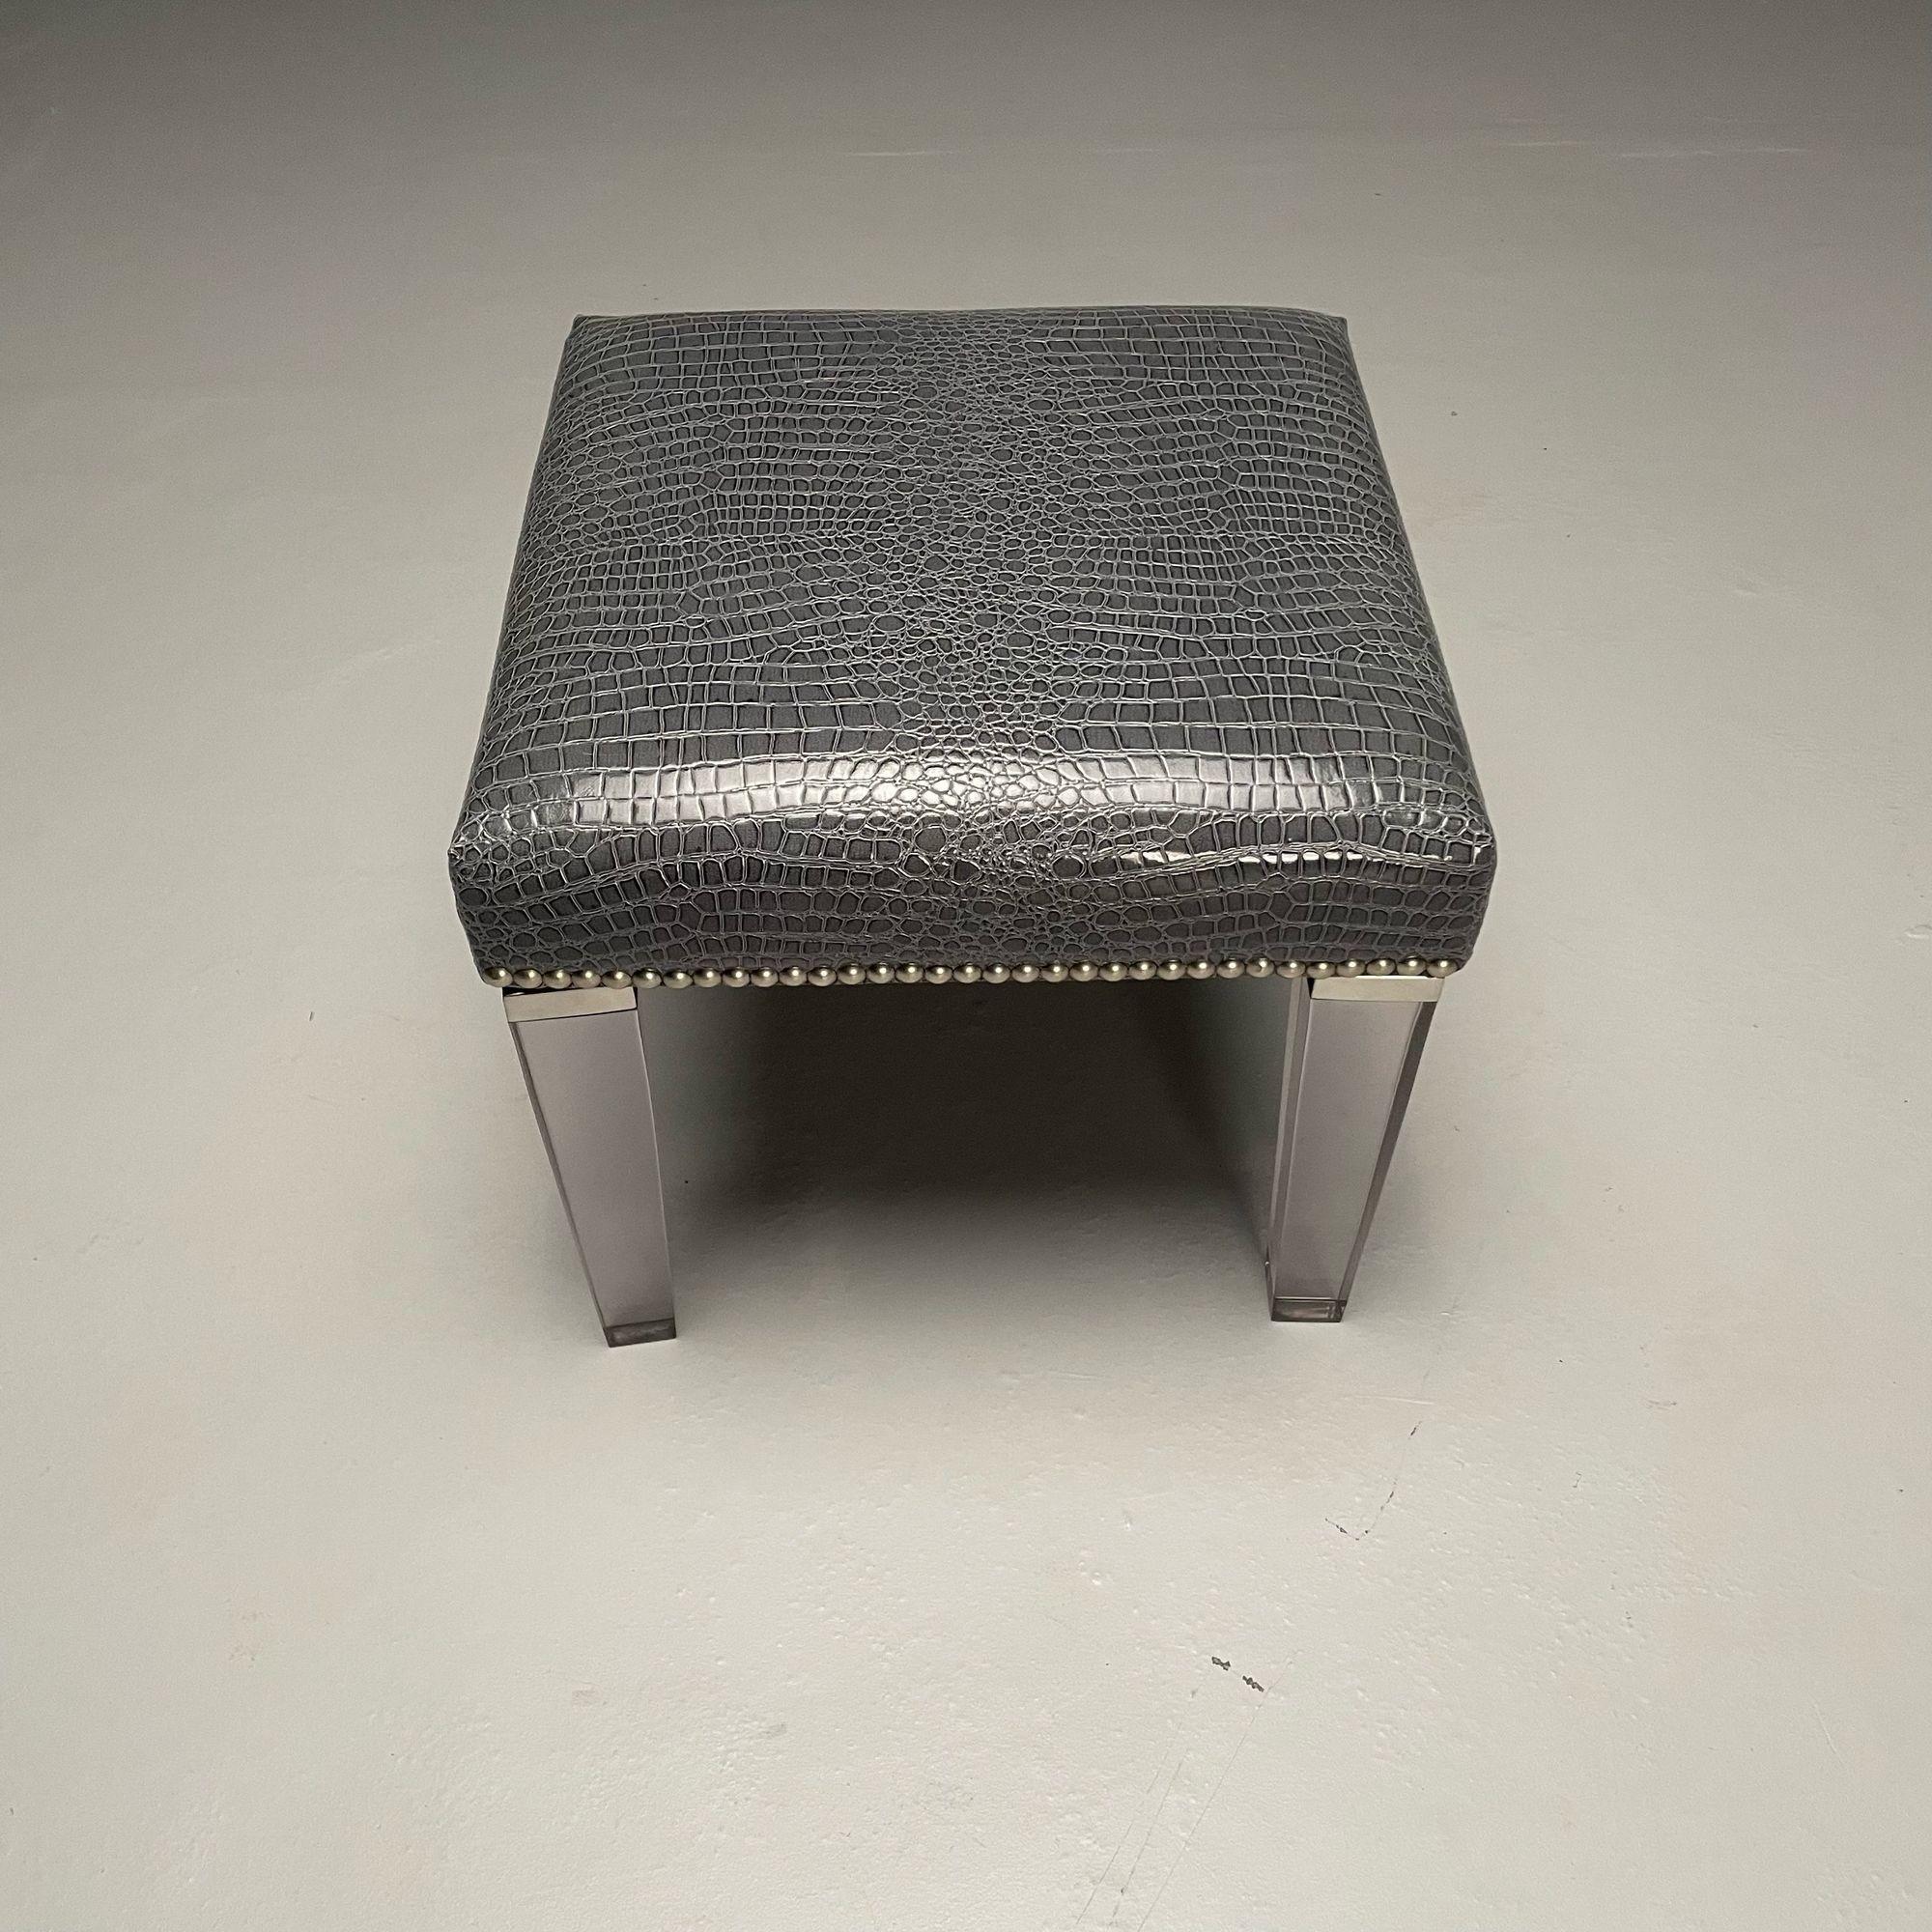 American Contemporary, Modern Footstool, Chrome, Acrylic, Faux Snakeskin, 2010s For Sale